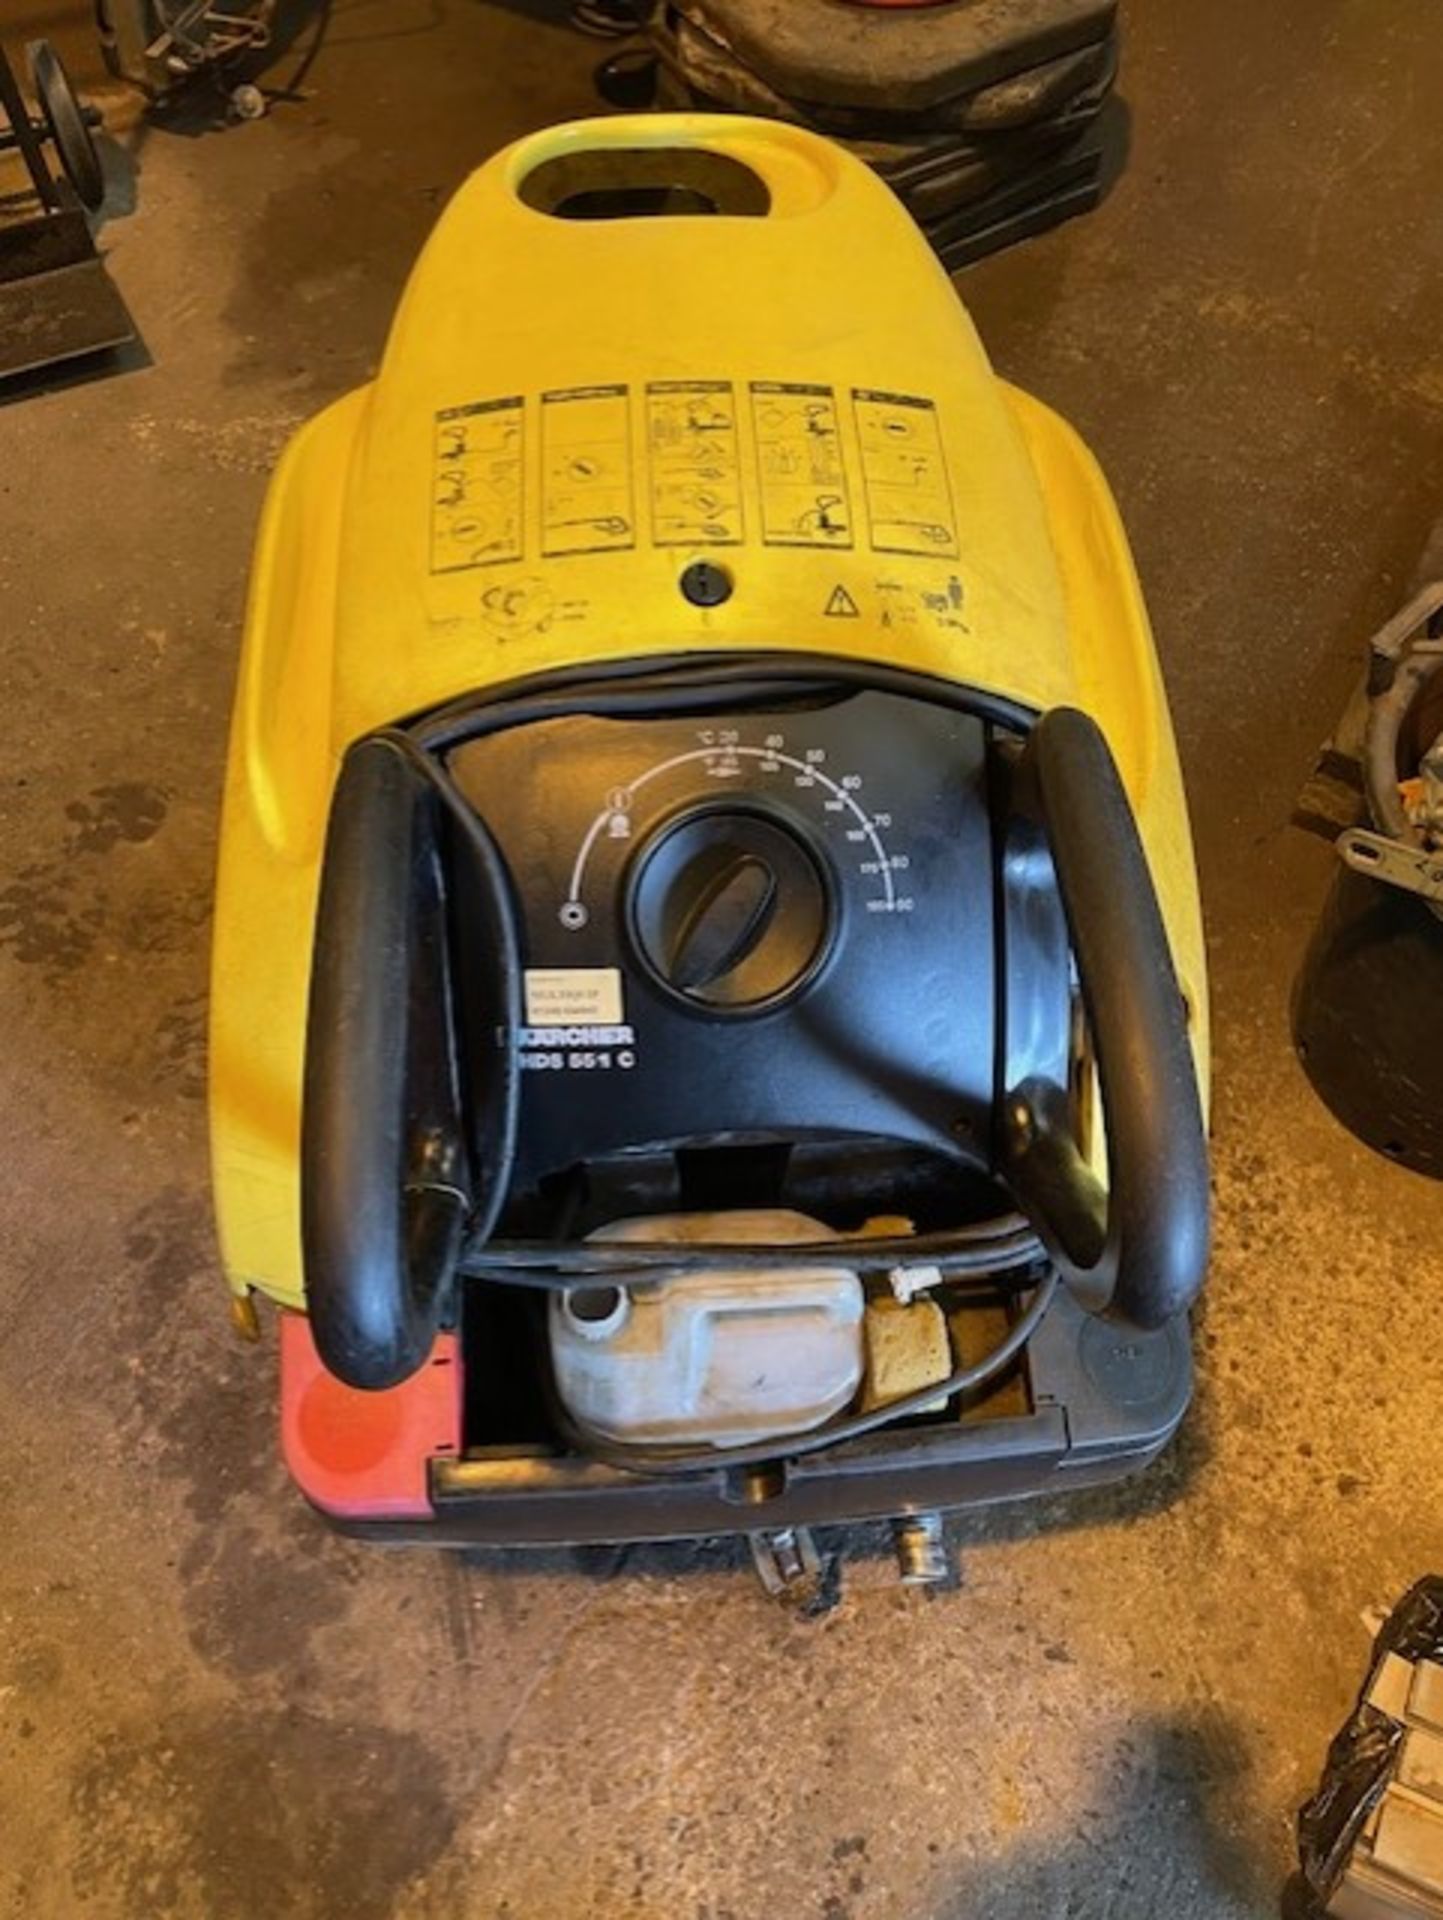 Karcher hot and cold pressure washer hds551 c model it’s in good condition still comes with hose and - Image 2 of 10